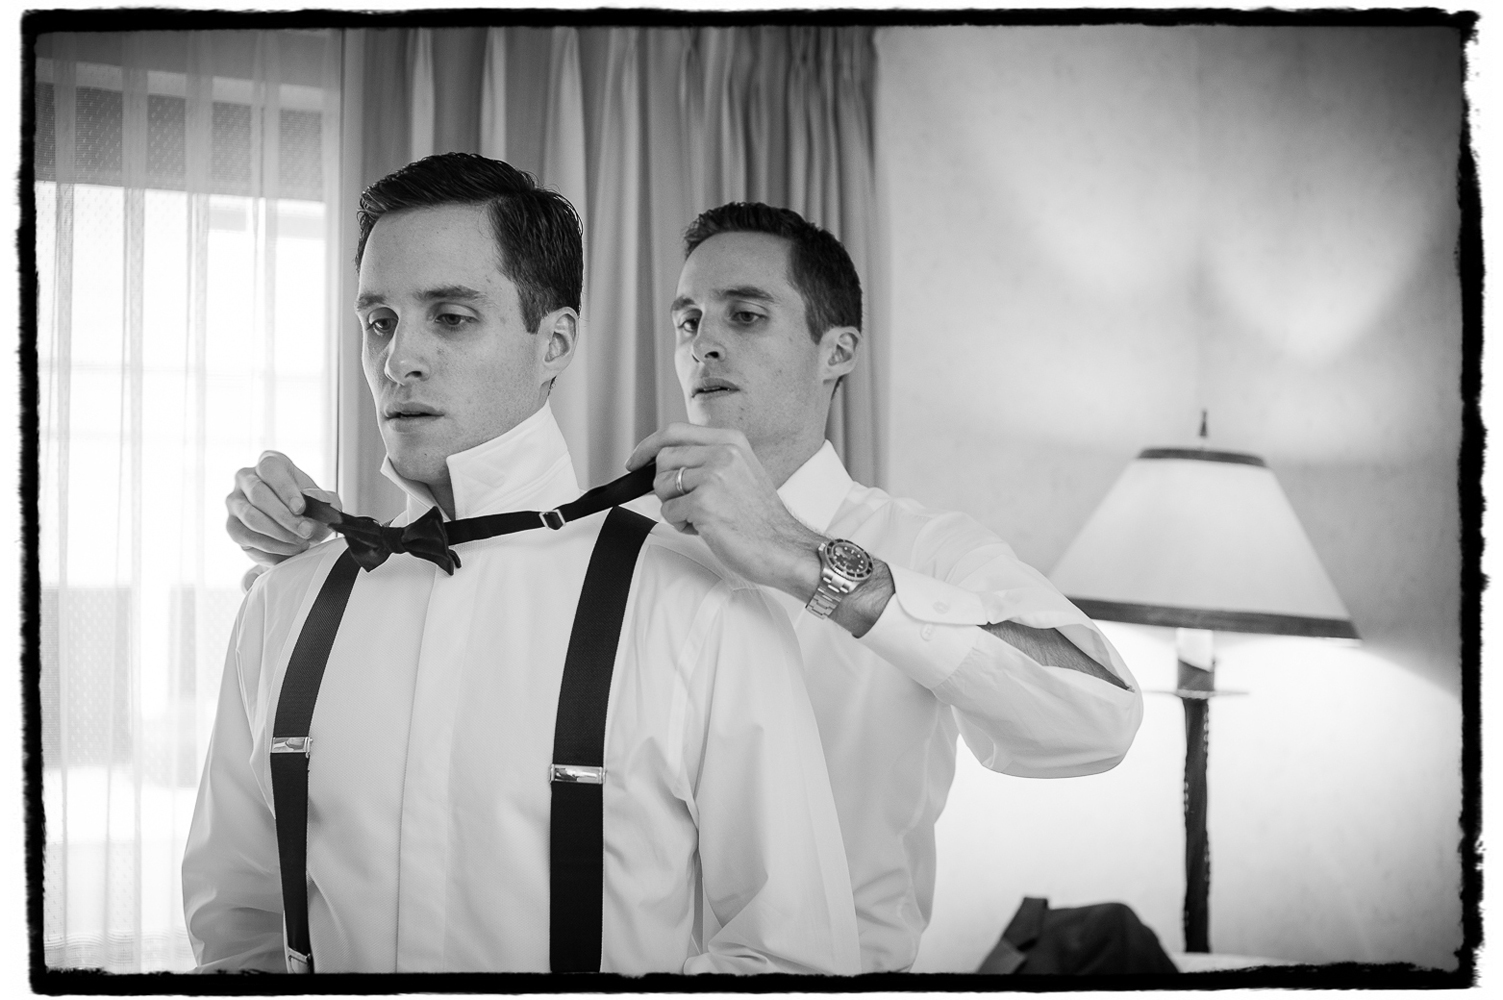 Mike's twin brother and best man helps him with the finishing touches on his tuxedo.